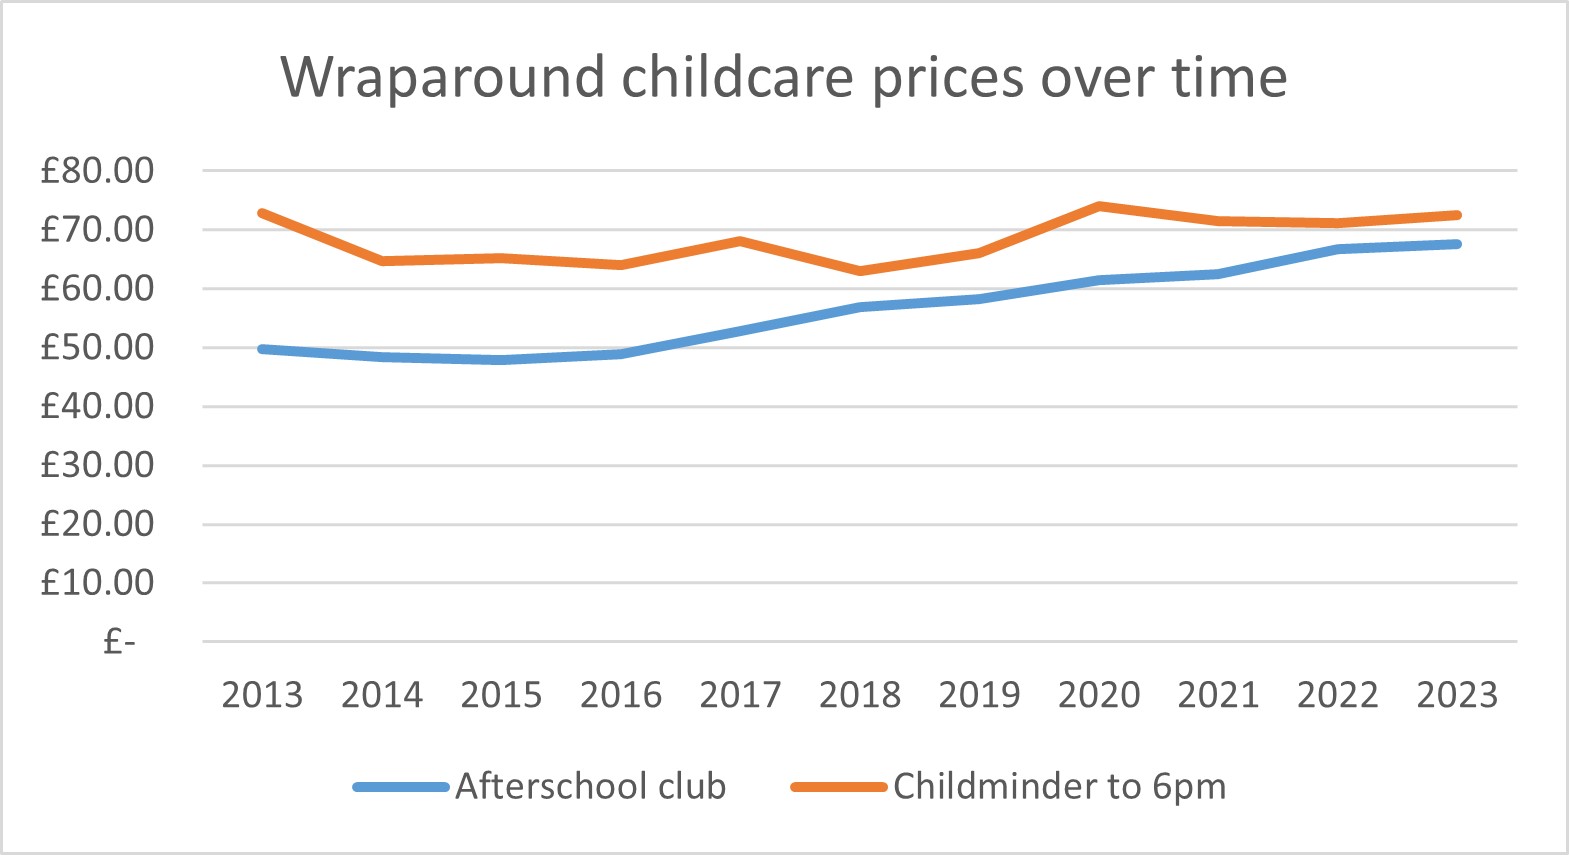 This line graph shows wraparound childcare prices rising since 2013 